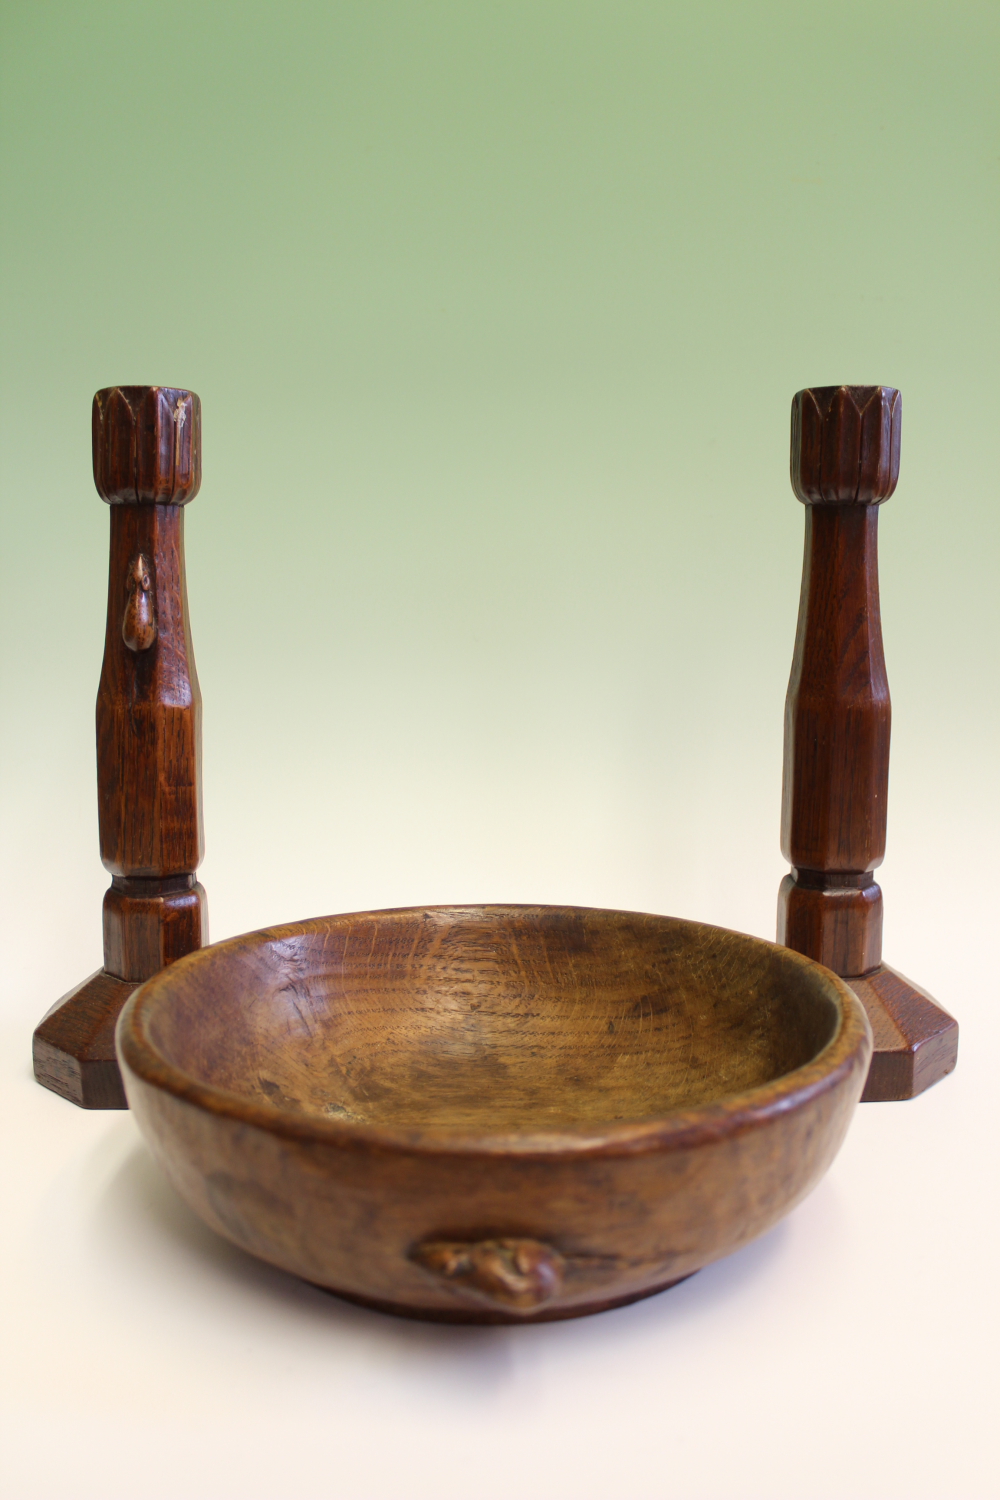 Robert Thompson "Mouseman": a pair of carved candlesticks, with stylized leaf tops and mouse